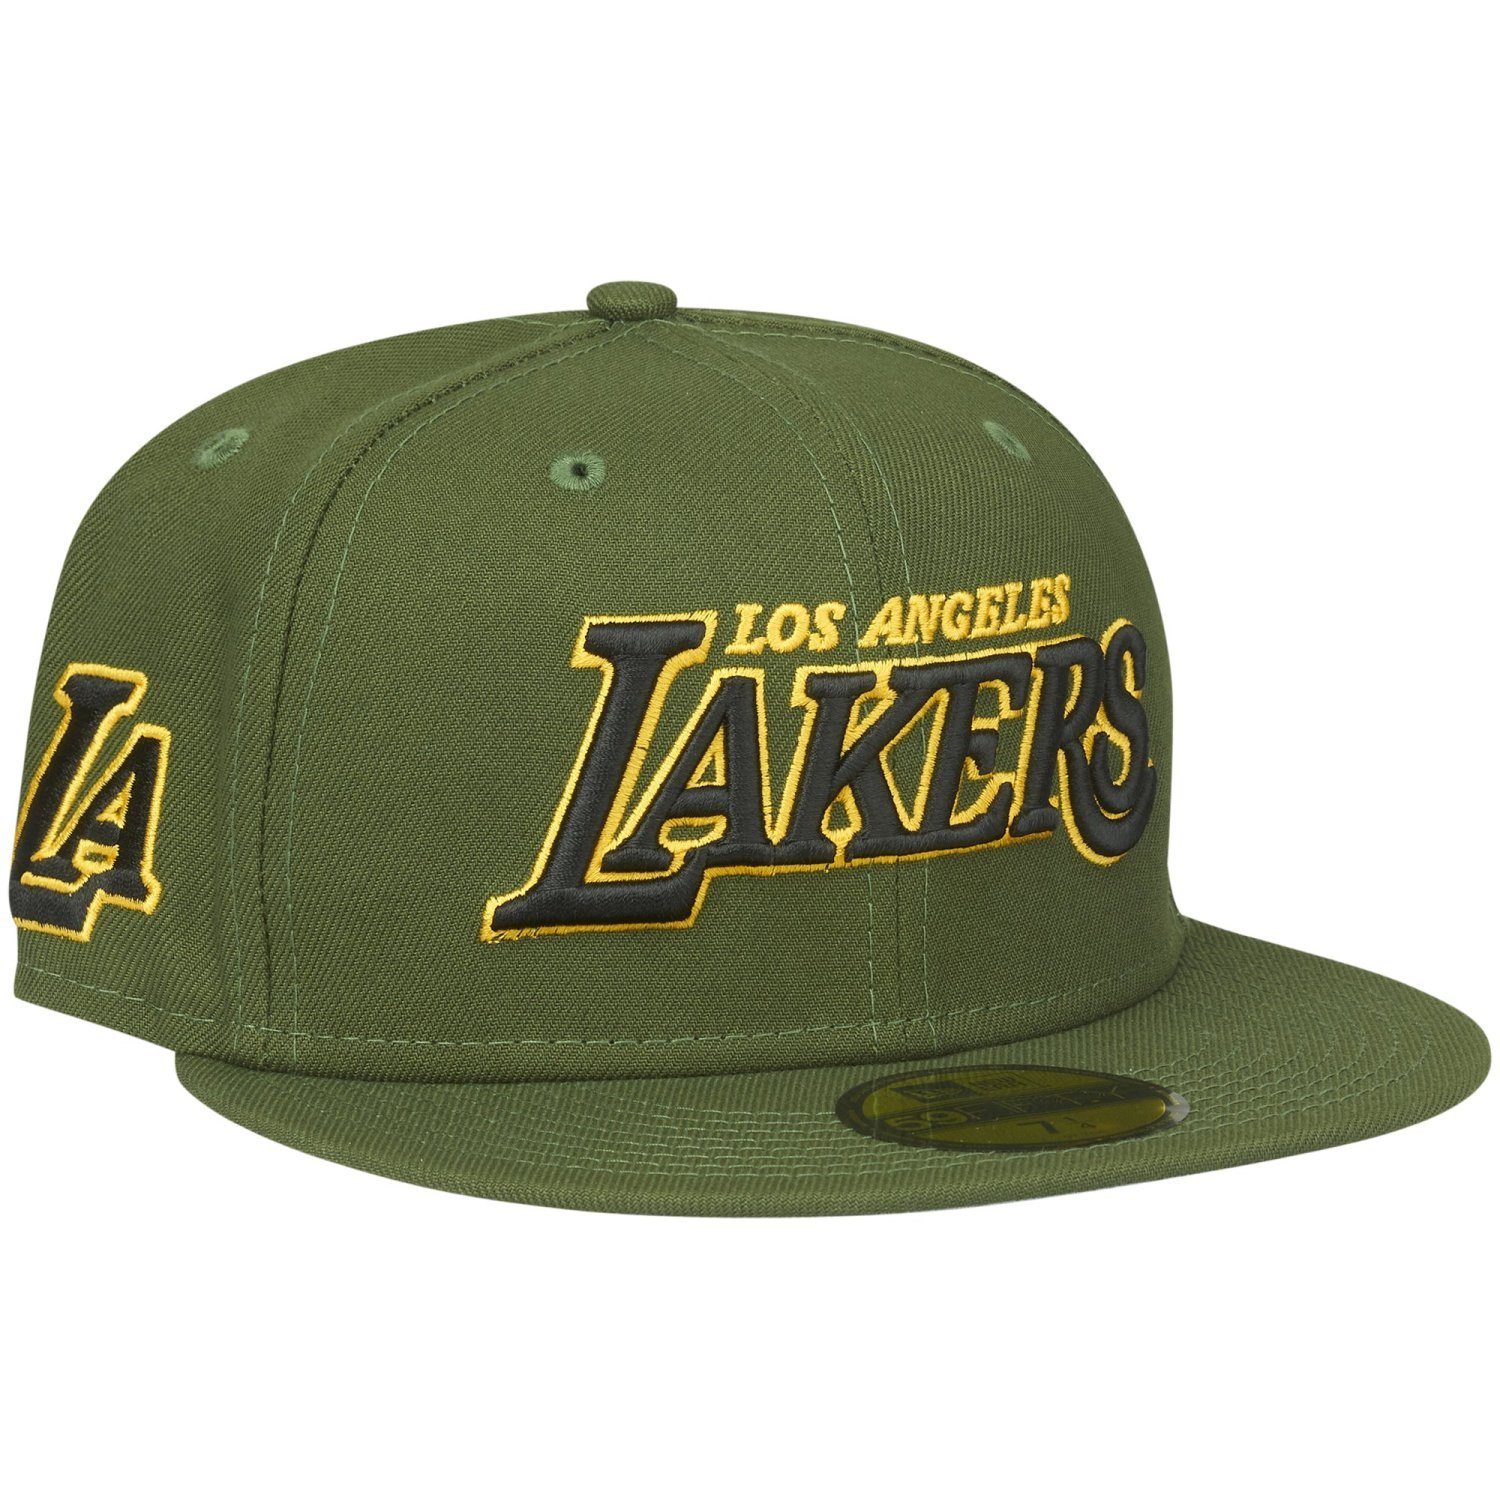 New Era Fitted Cap 59Fifty Los Angeles Lakers olive